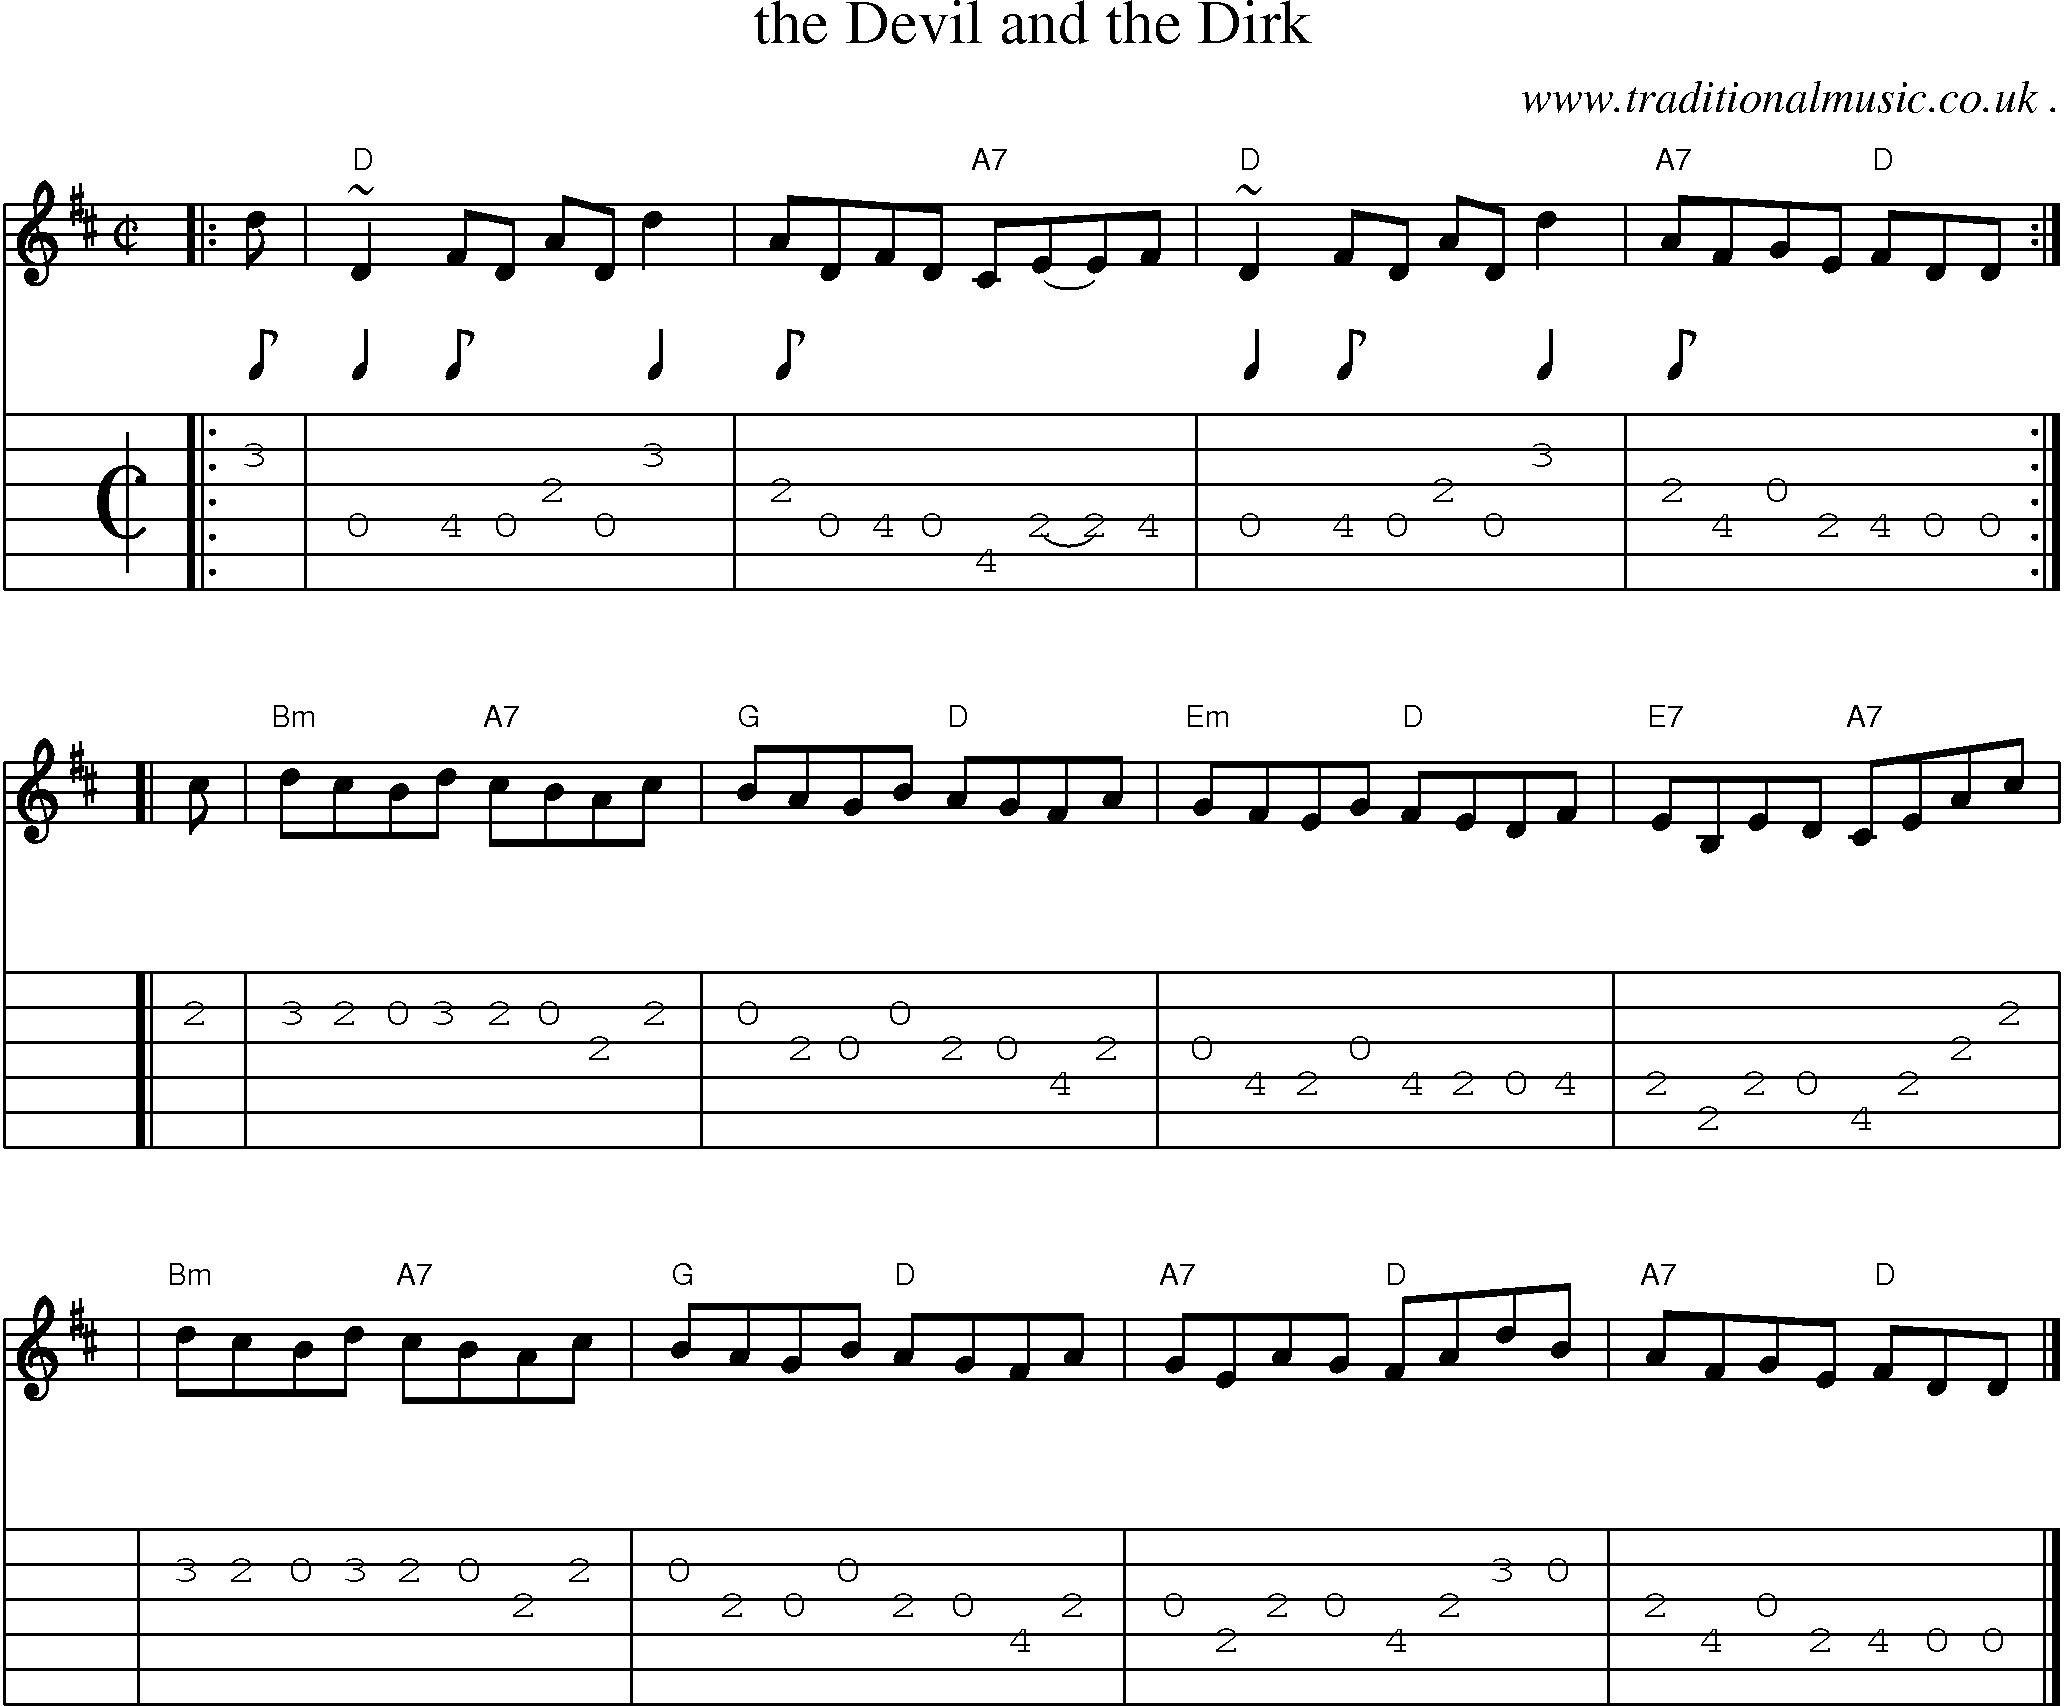 Sheet-music  score, Chords and Guitar Tabs for The Devil And The Dirk